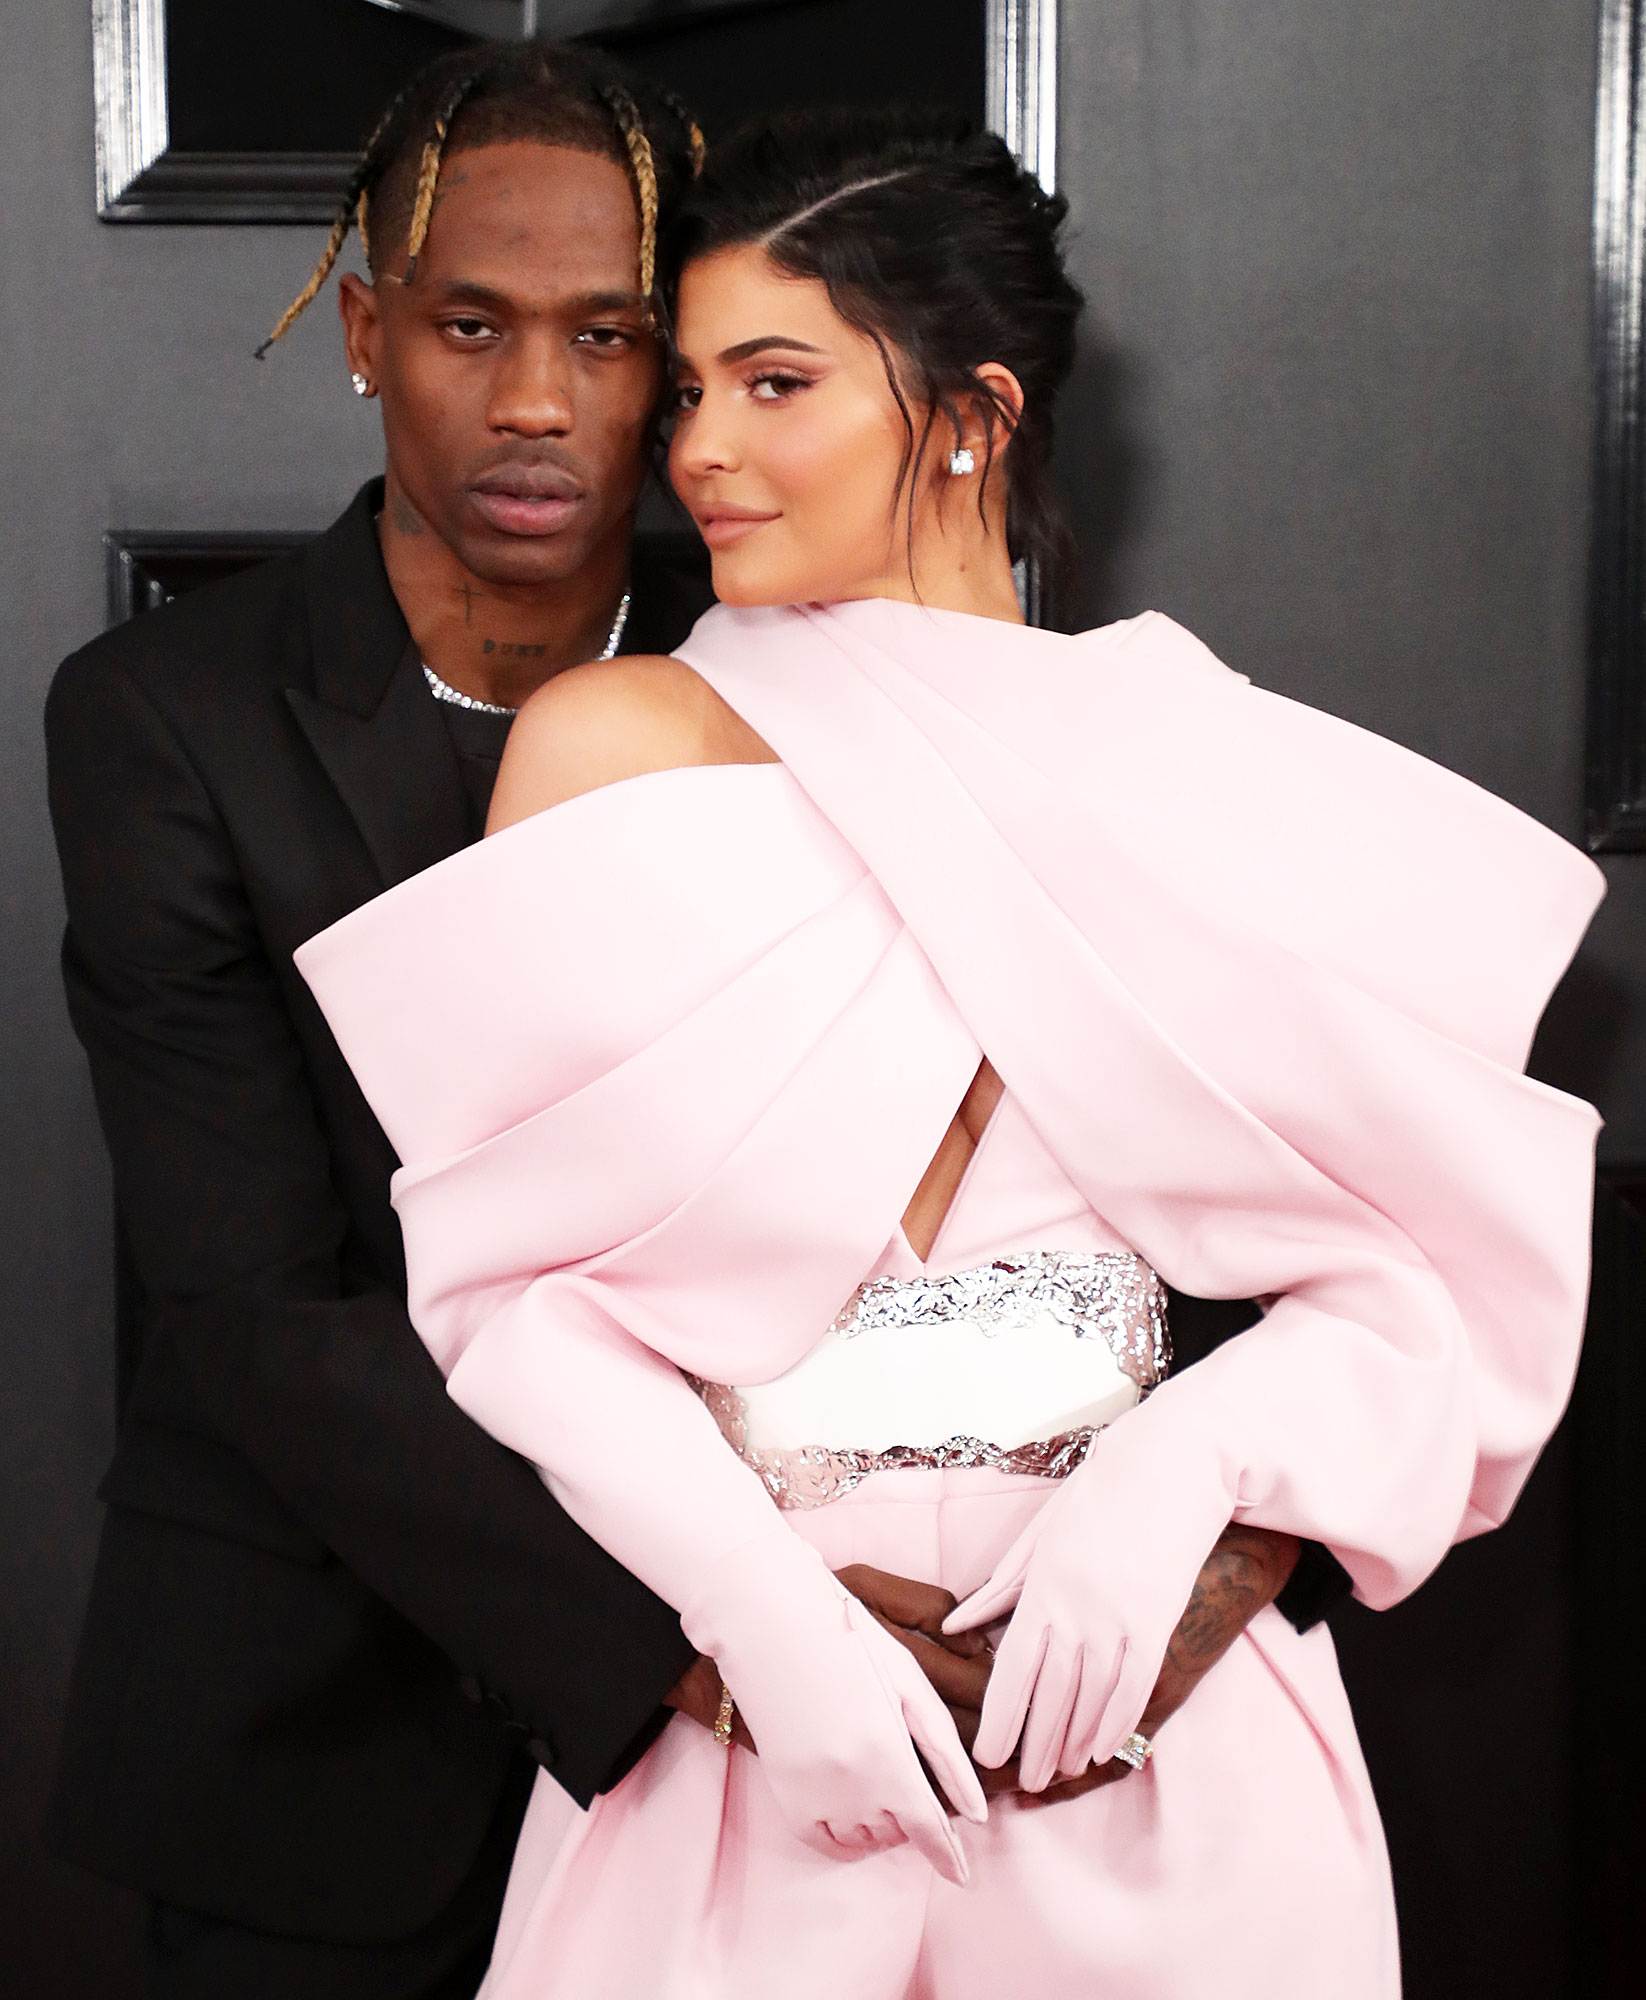 Kylie Jenner Poses Nude With Travis Scott for Playboy Spread — Photos |  Allure